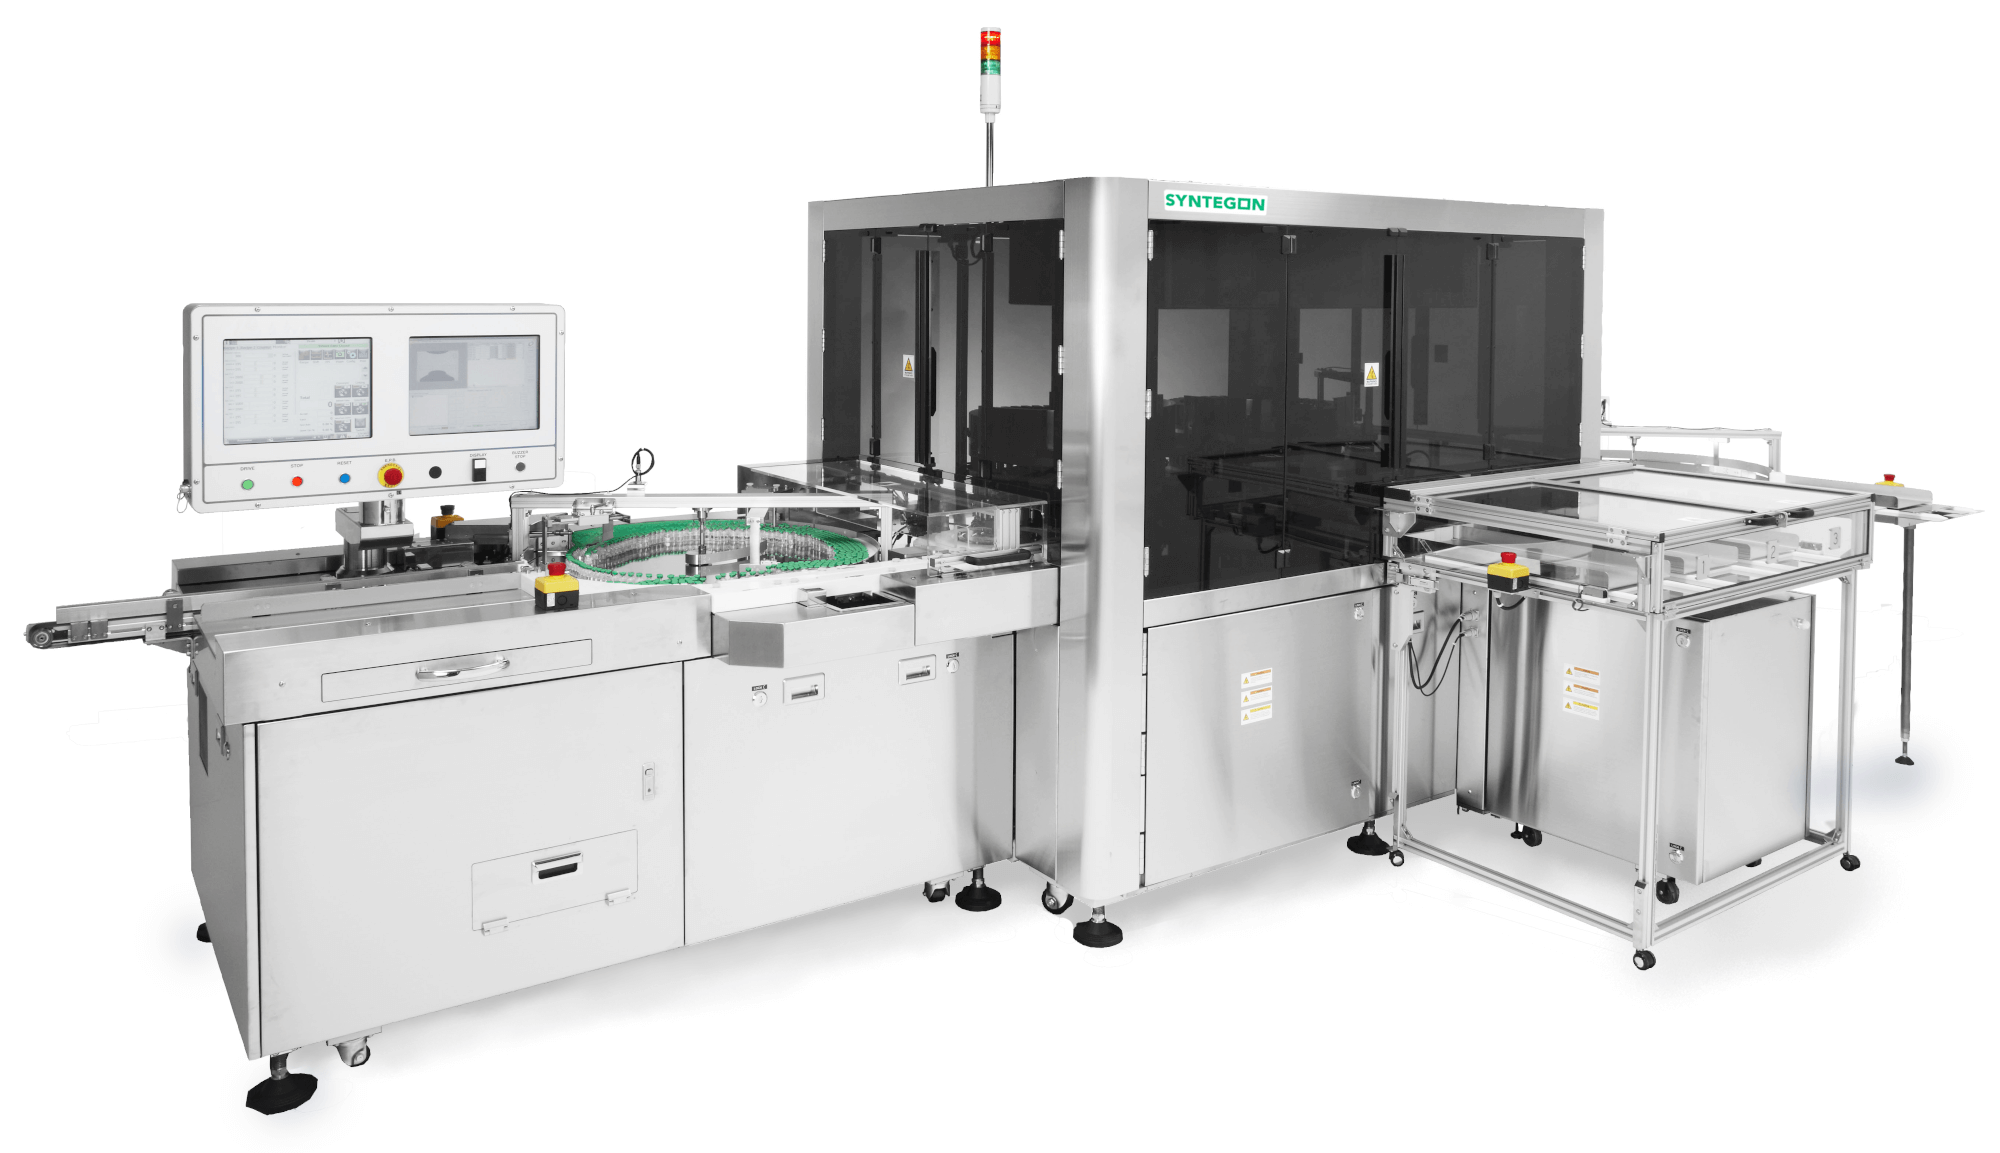 AIM 5 - Automated inspection machine with integrated CCI testing